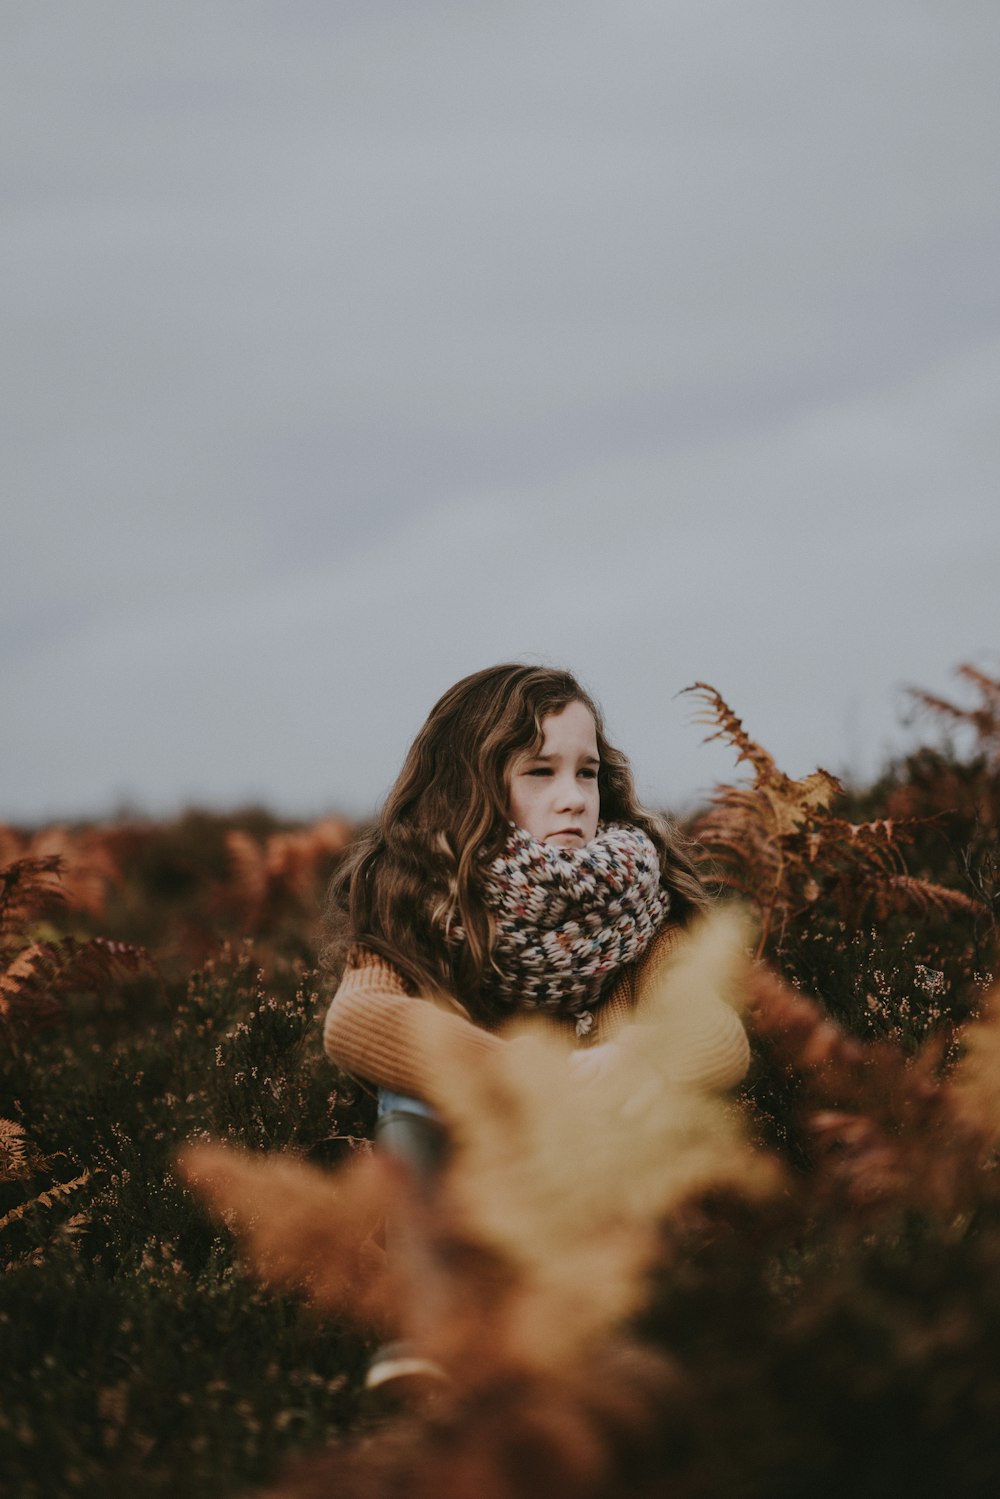 selective focus photography of girl wearing scarf standing surrounded by plants